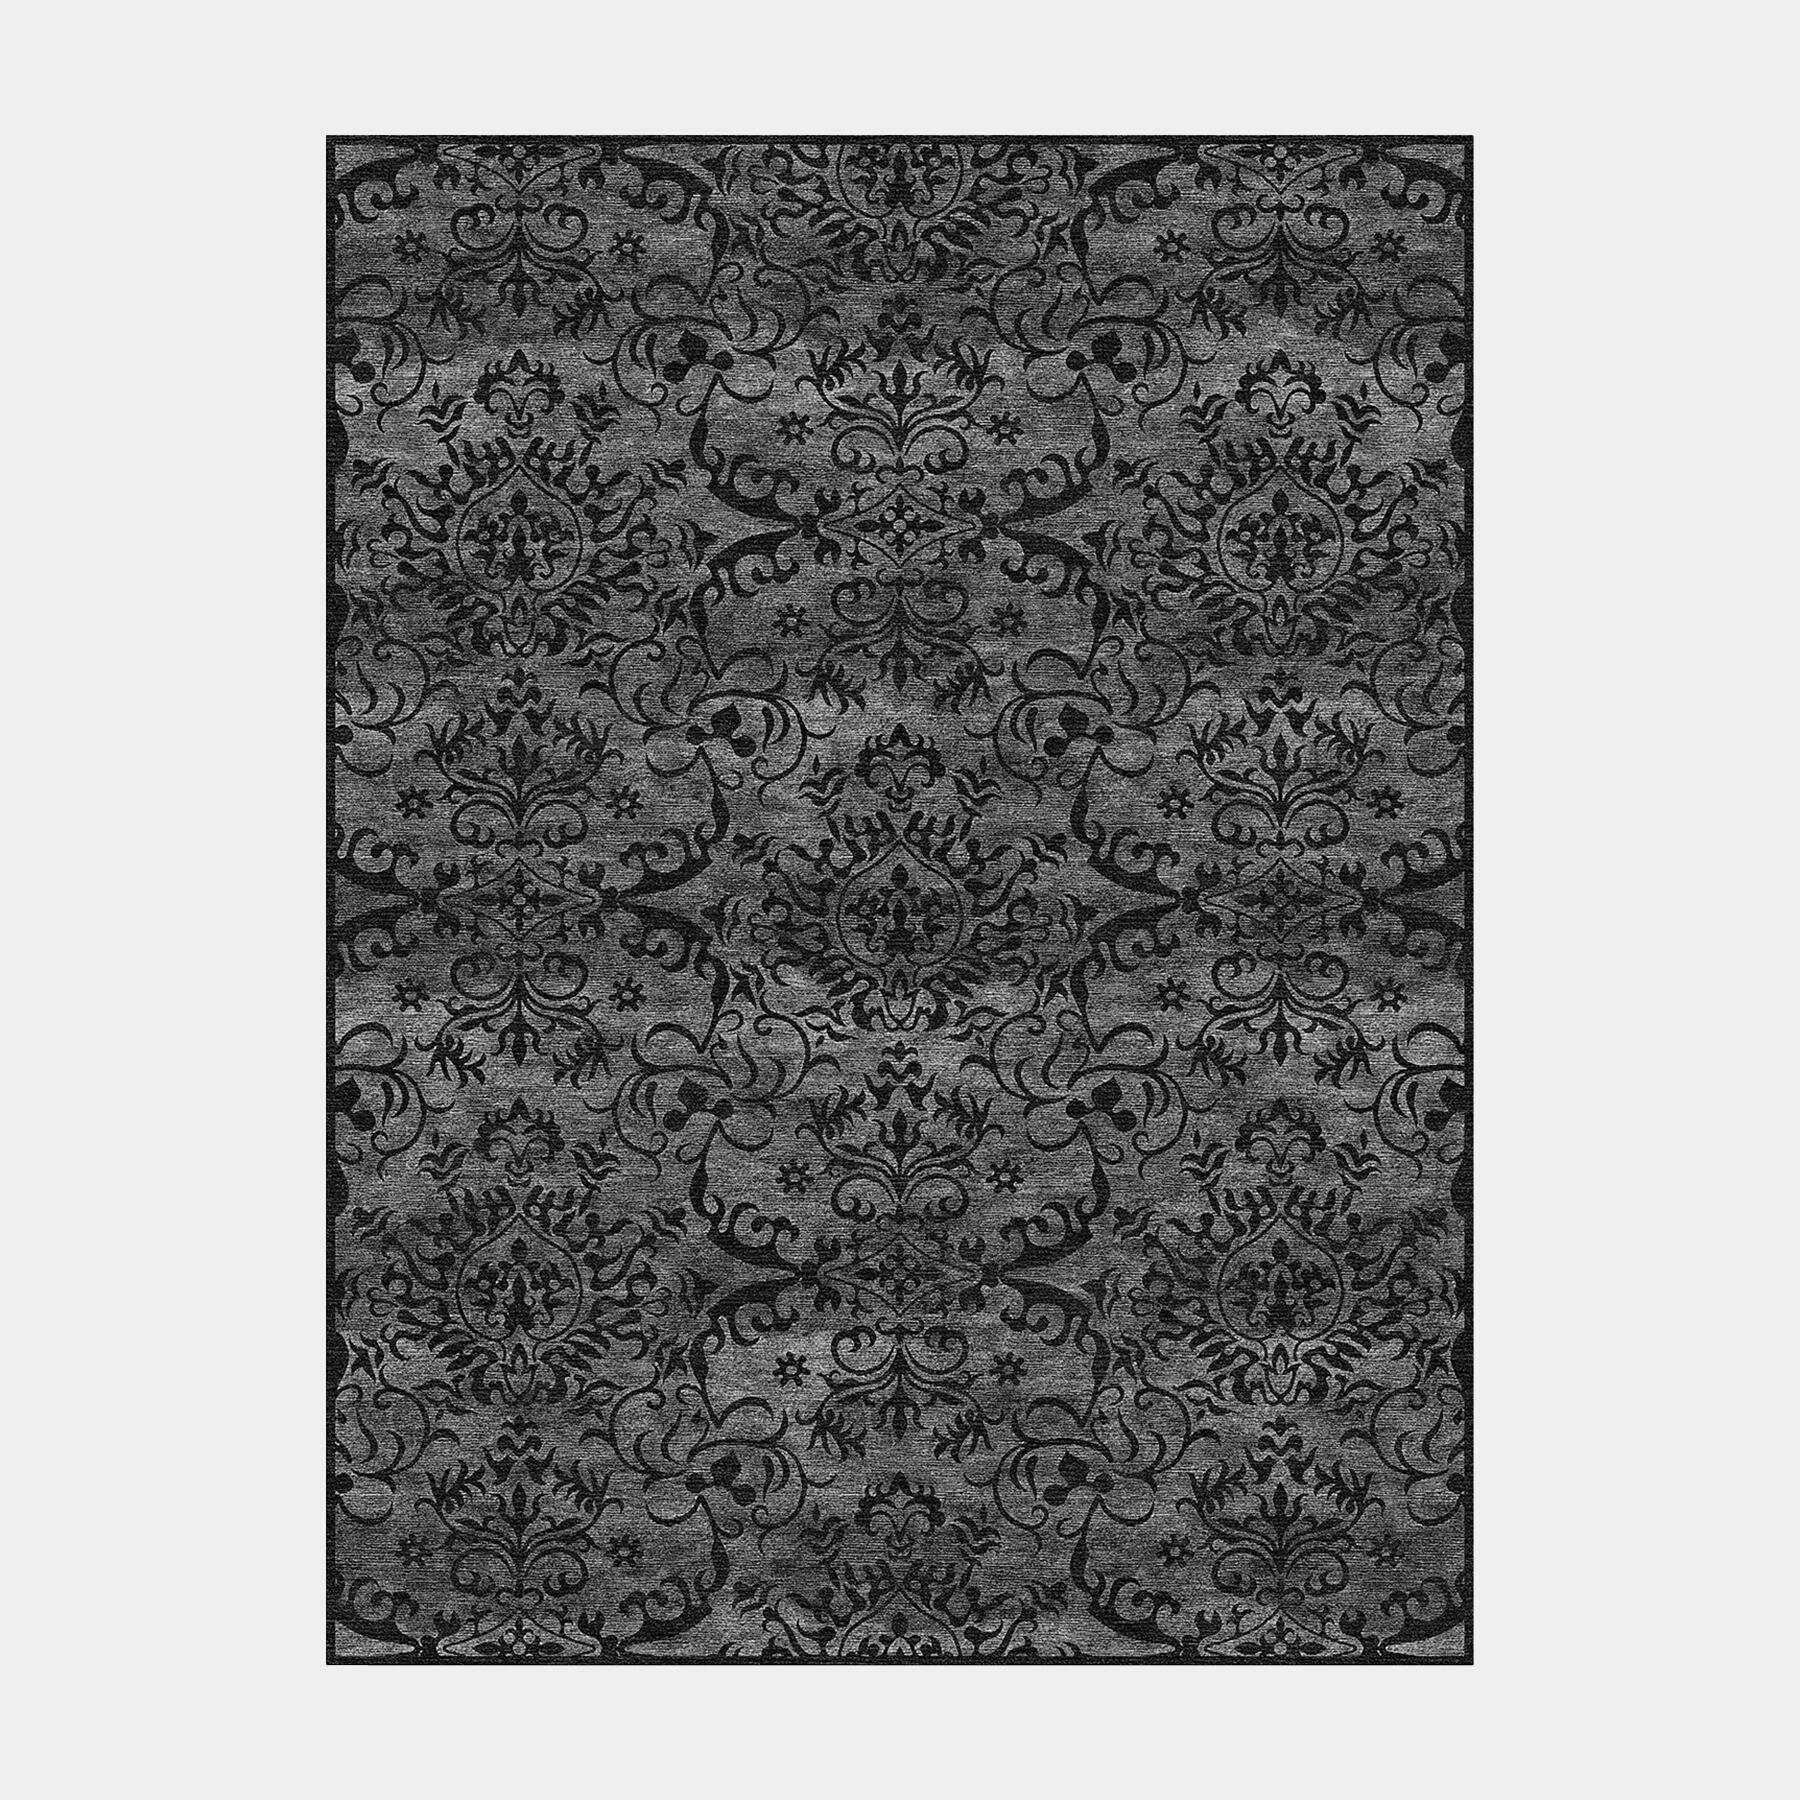 Damask with Borders Rug, Perfection/100% Wool, Perfection/100% Silk